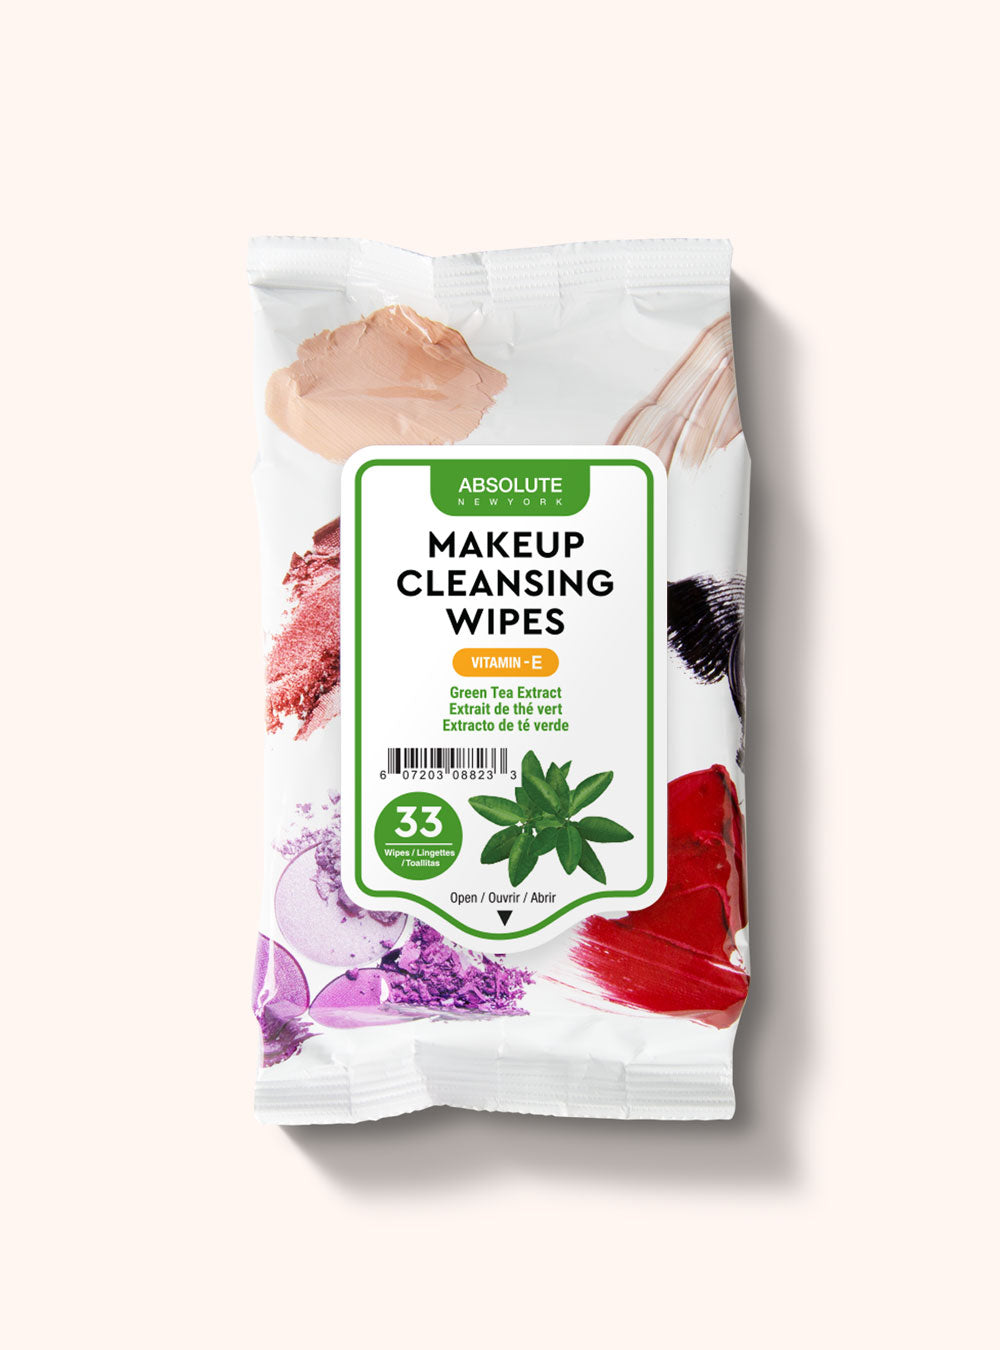 Makeup Cleansing Tissues (33 Count) || Green Tea